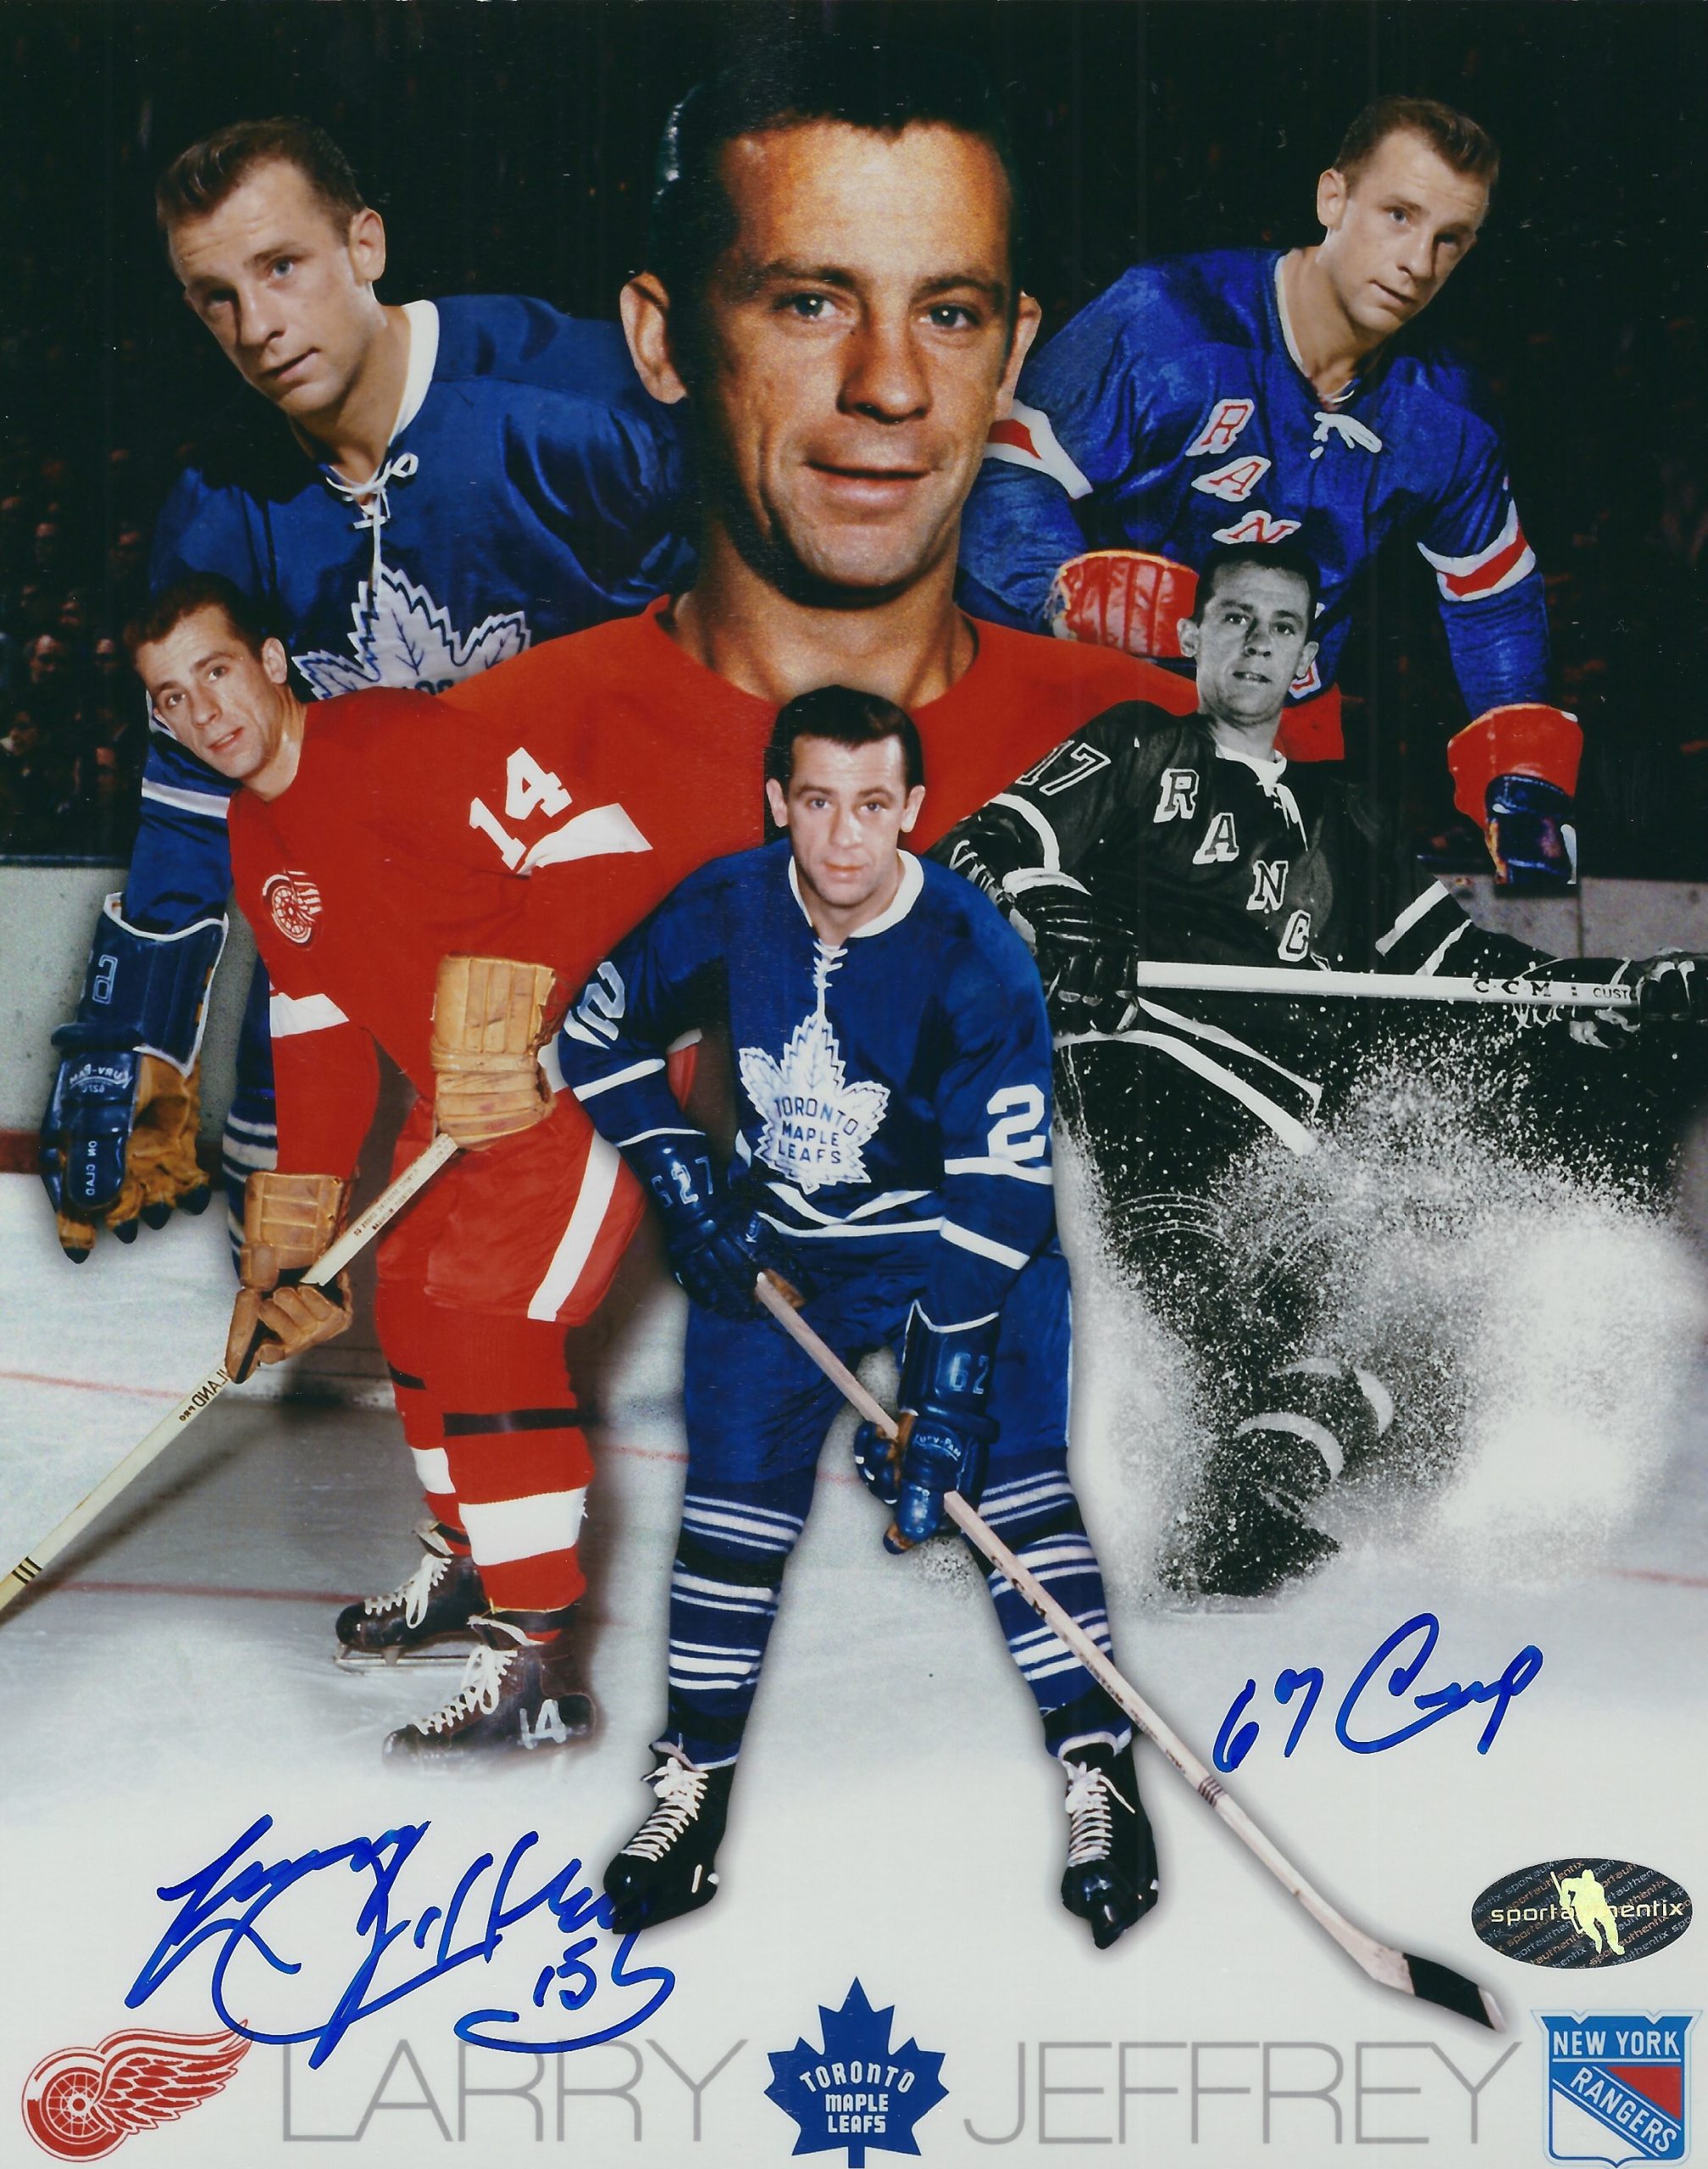 Wendel Clark Autographed Toronto Maple Leafs 8x10 Photo (After